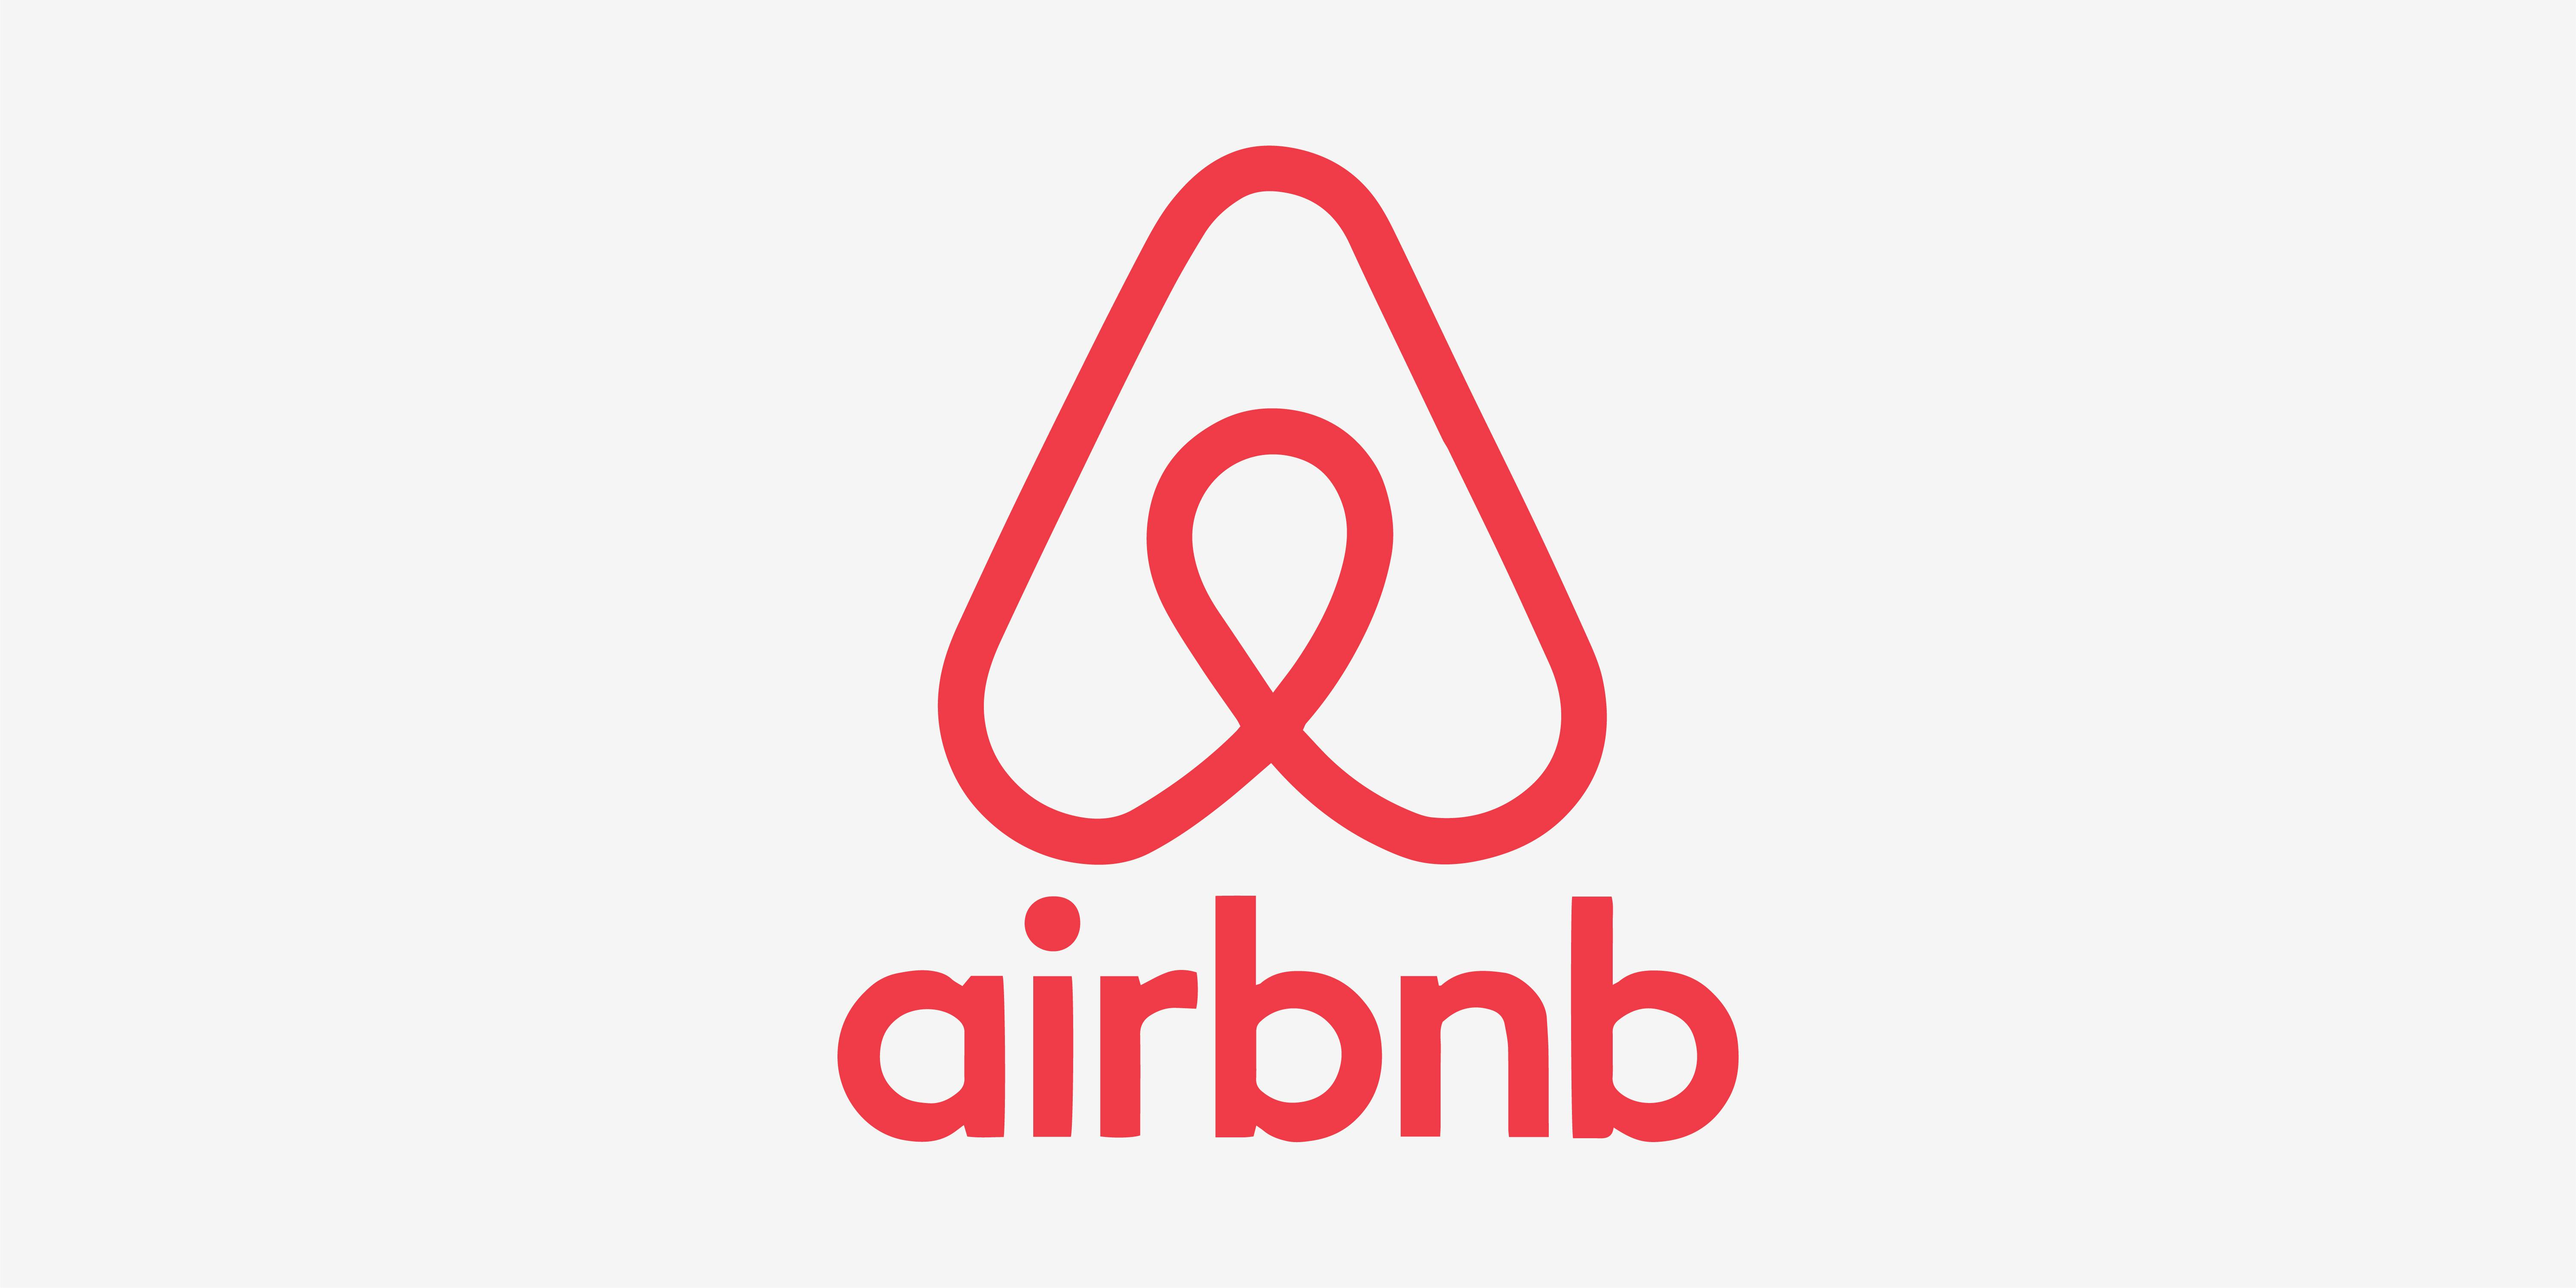 apps similar to airbnb